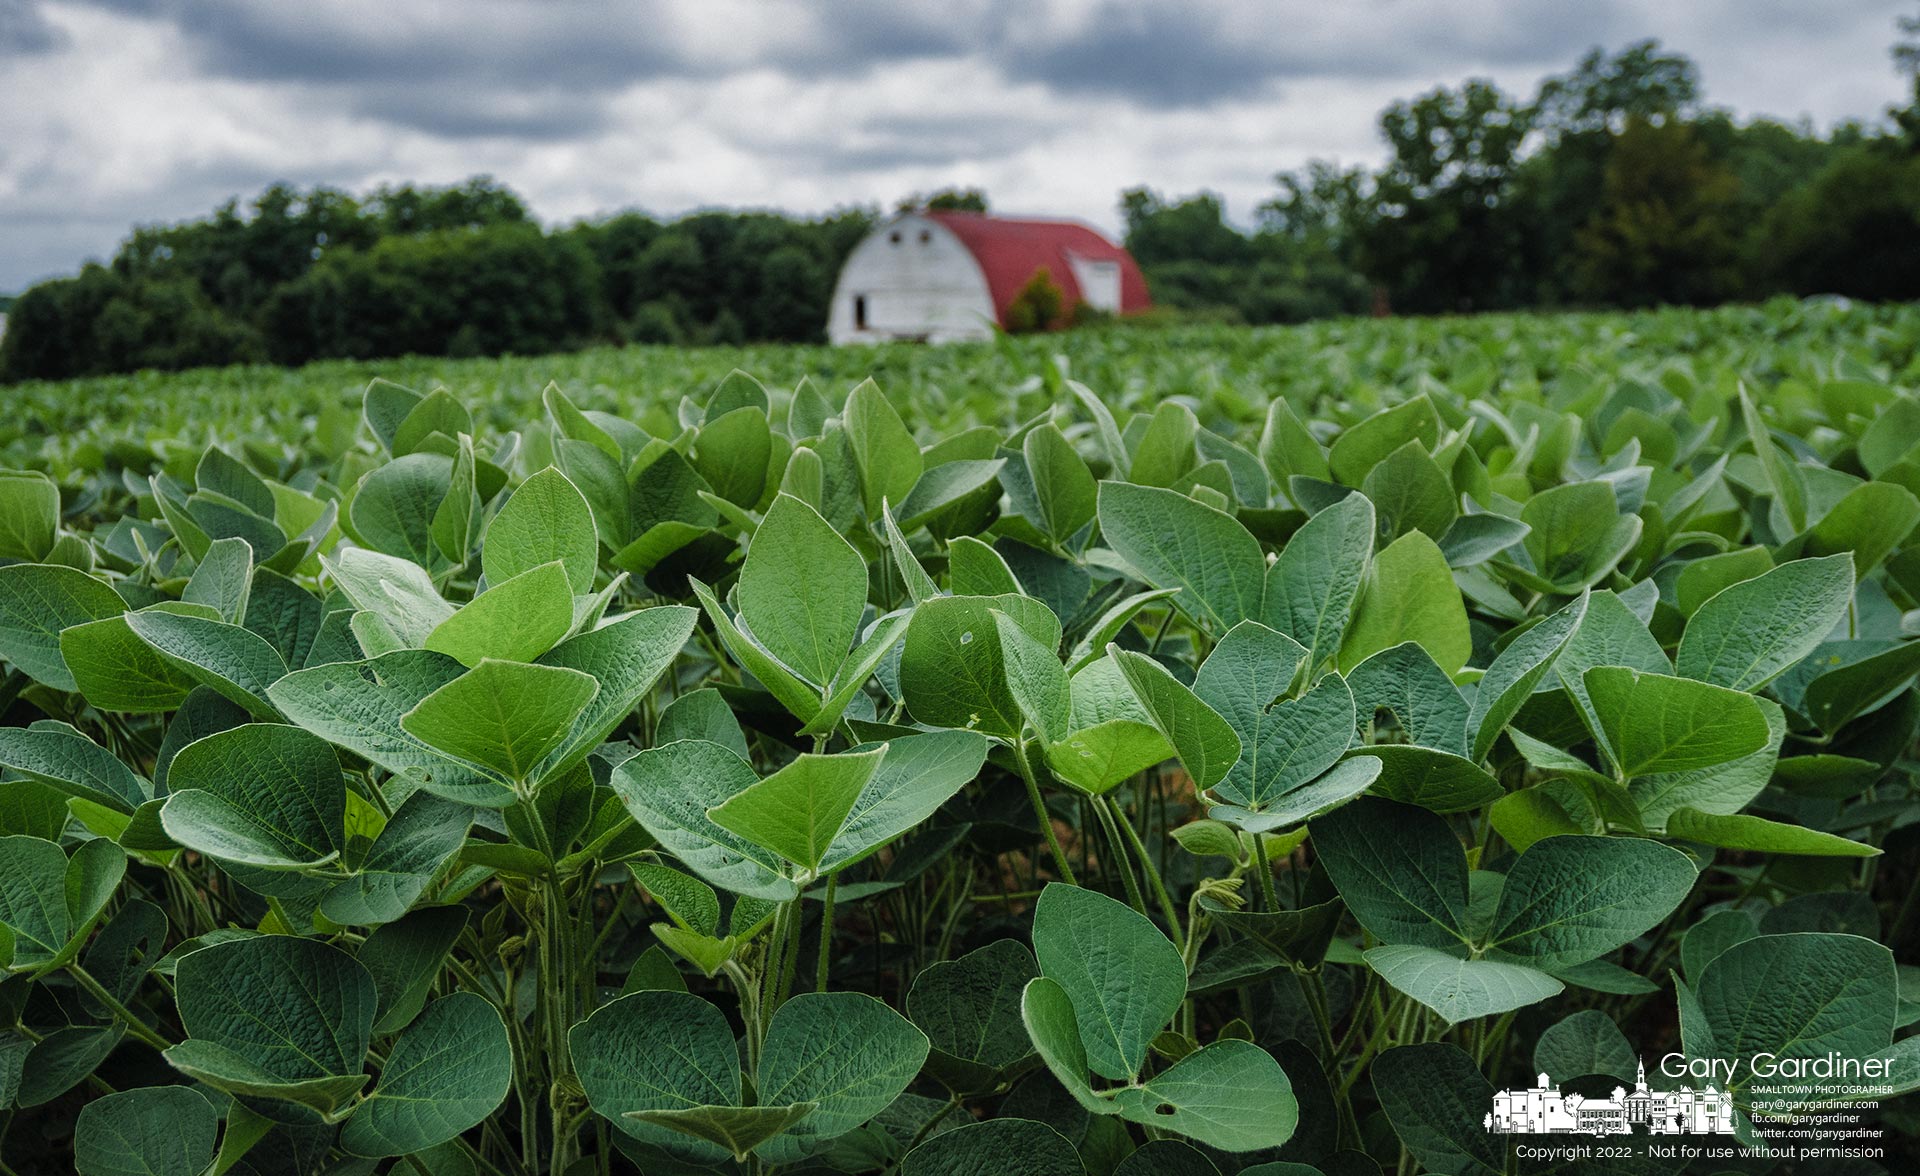 Soybeans take advantage of the warm weather and the recent rain to quickly grow to the flowering stage in this crop on the upper section of the main field at the Braun Farm. My Final Photo for July 18, 2022.